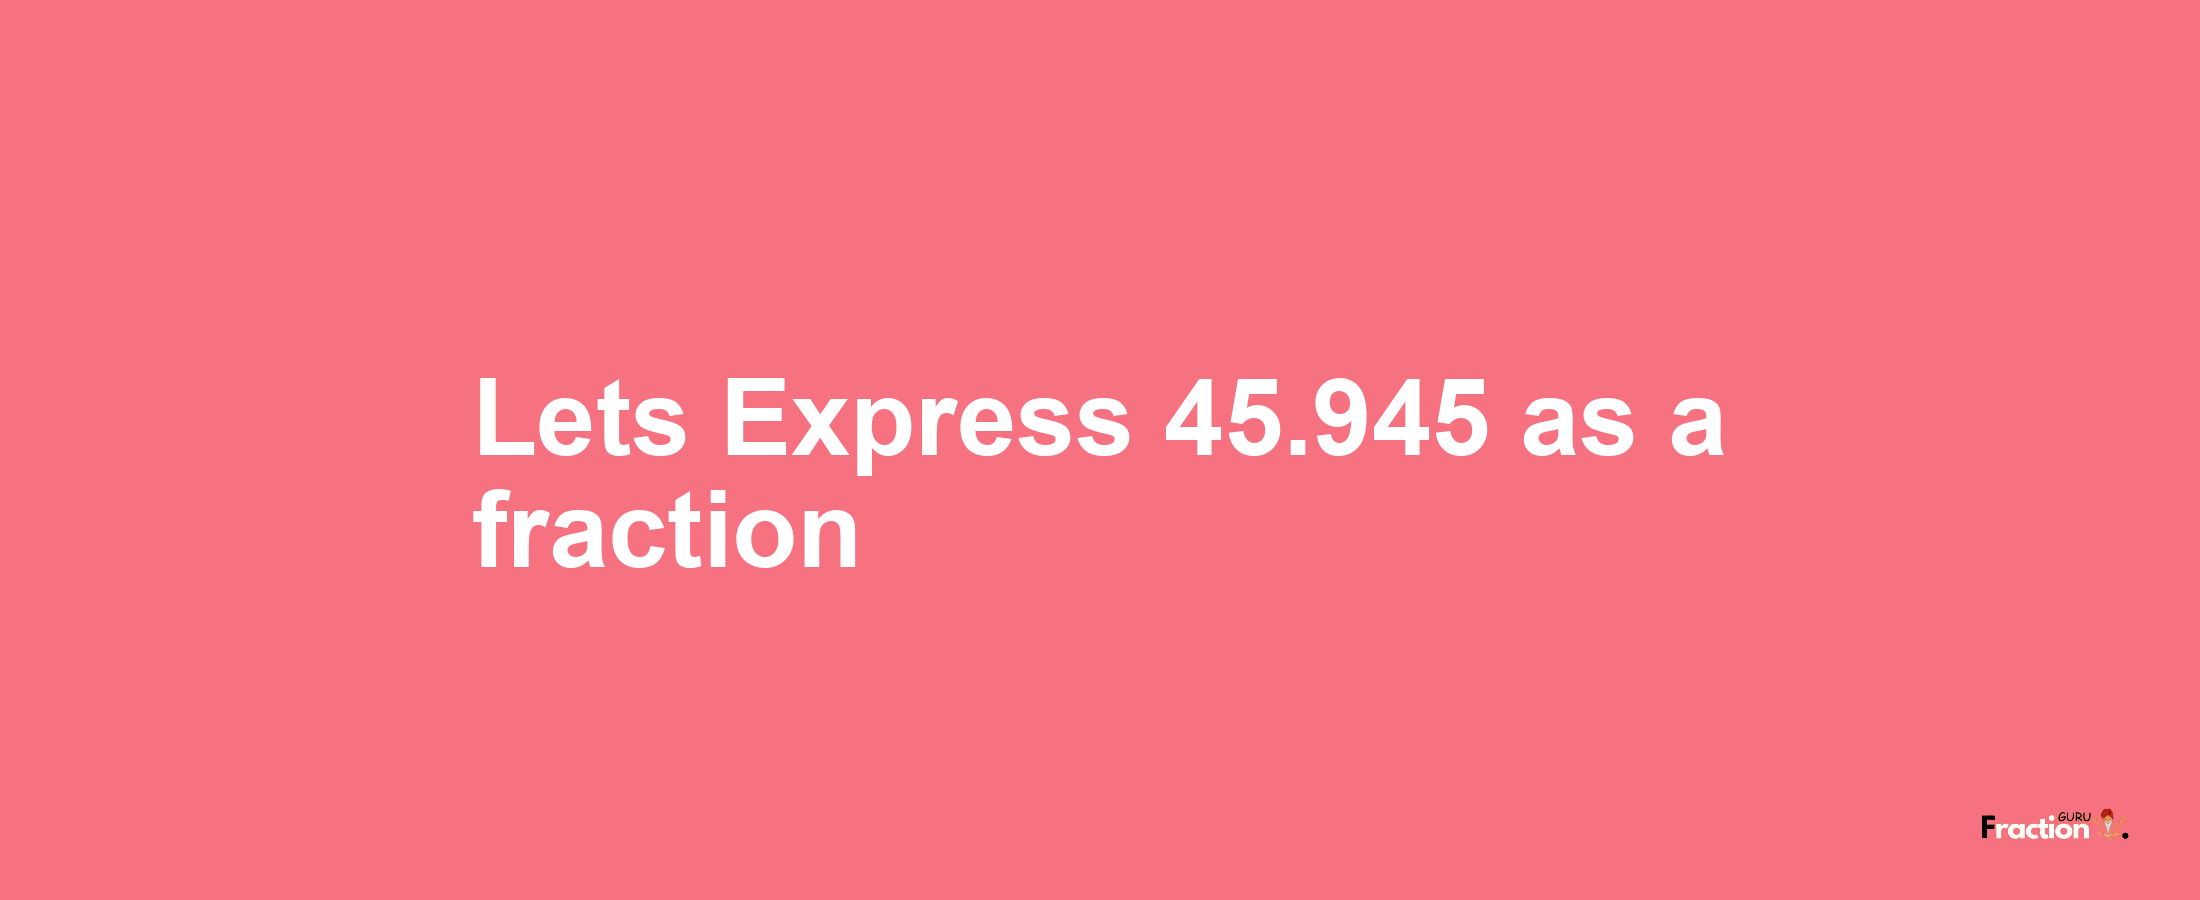 Lets Express 45.945 as afraction